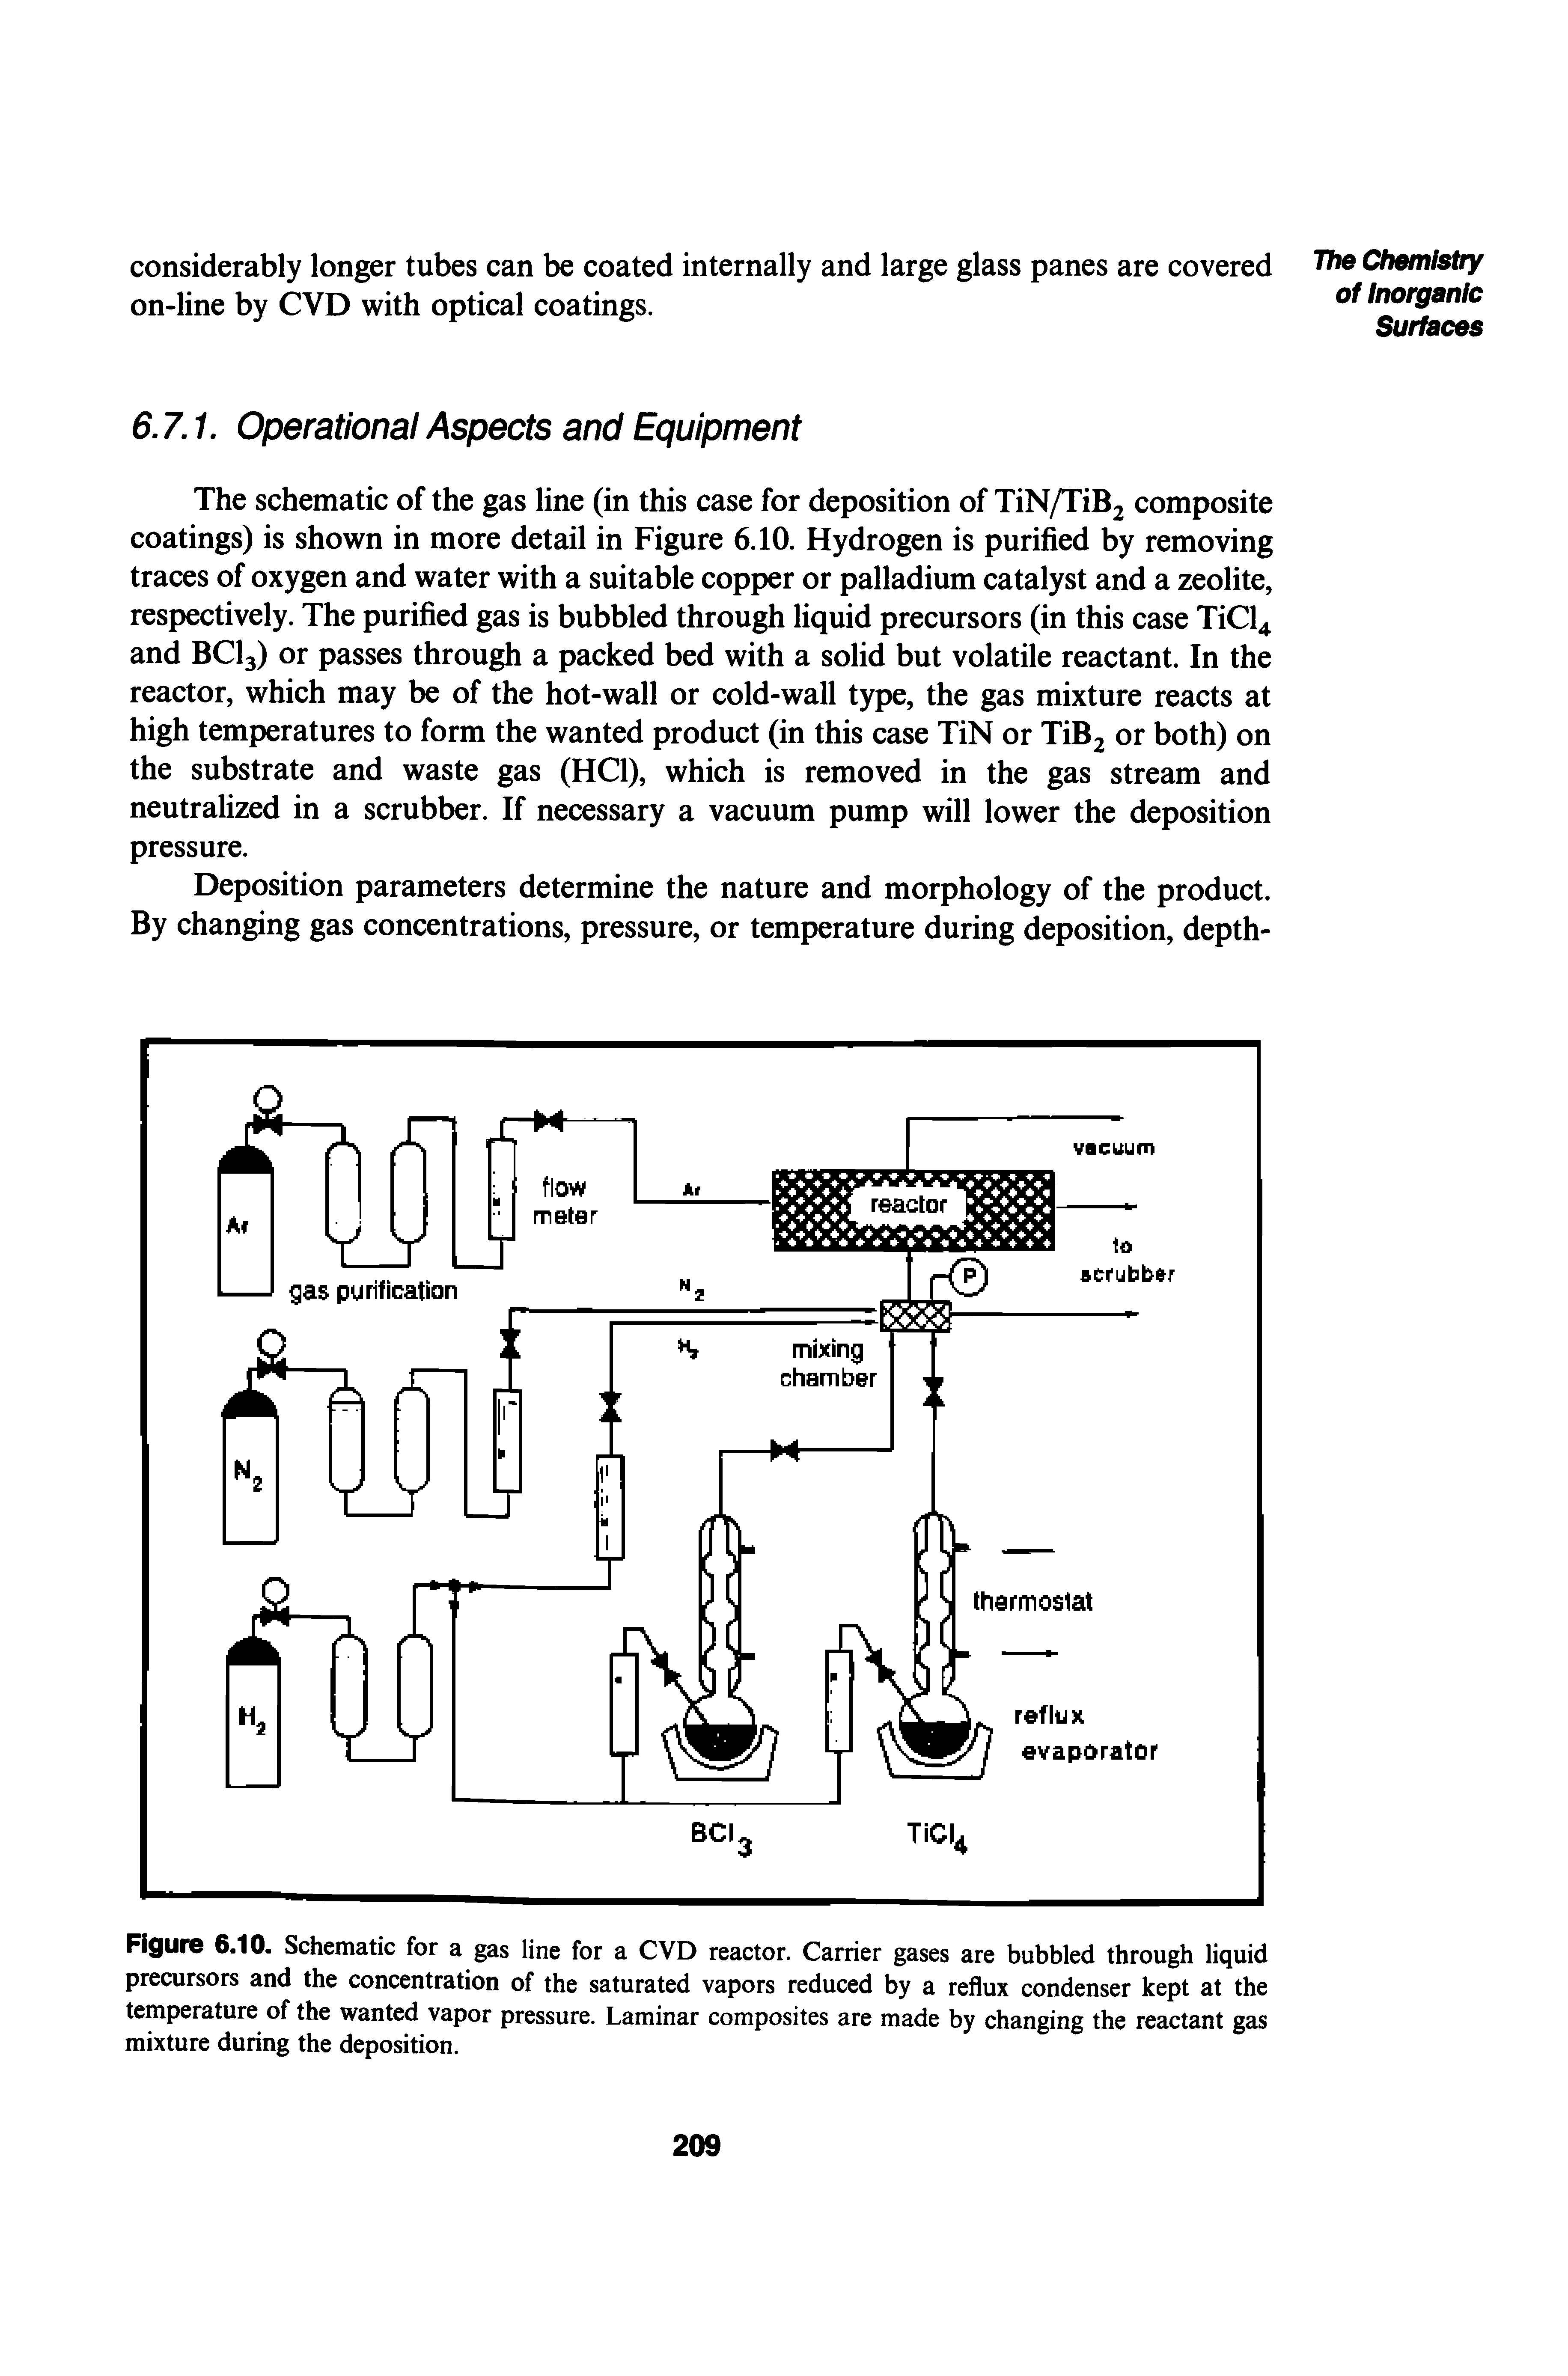 Figure 6.10. Schematic for a gas line for a CVD reactor. Carrier gases are bubbled through liquid precursors and the concentration of the saturated vapors reduced by a reflux condenser kept at the temperature of the wanted vapor pressure. Laminar composites are made by changing the reactant gas mixture during the deposition.